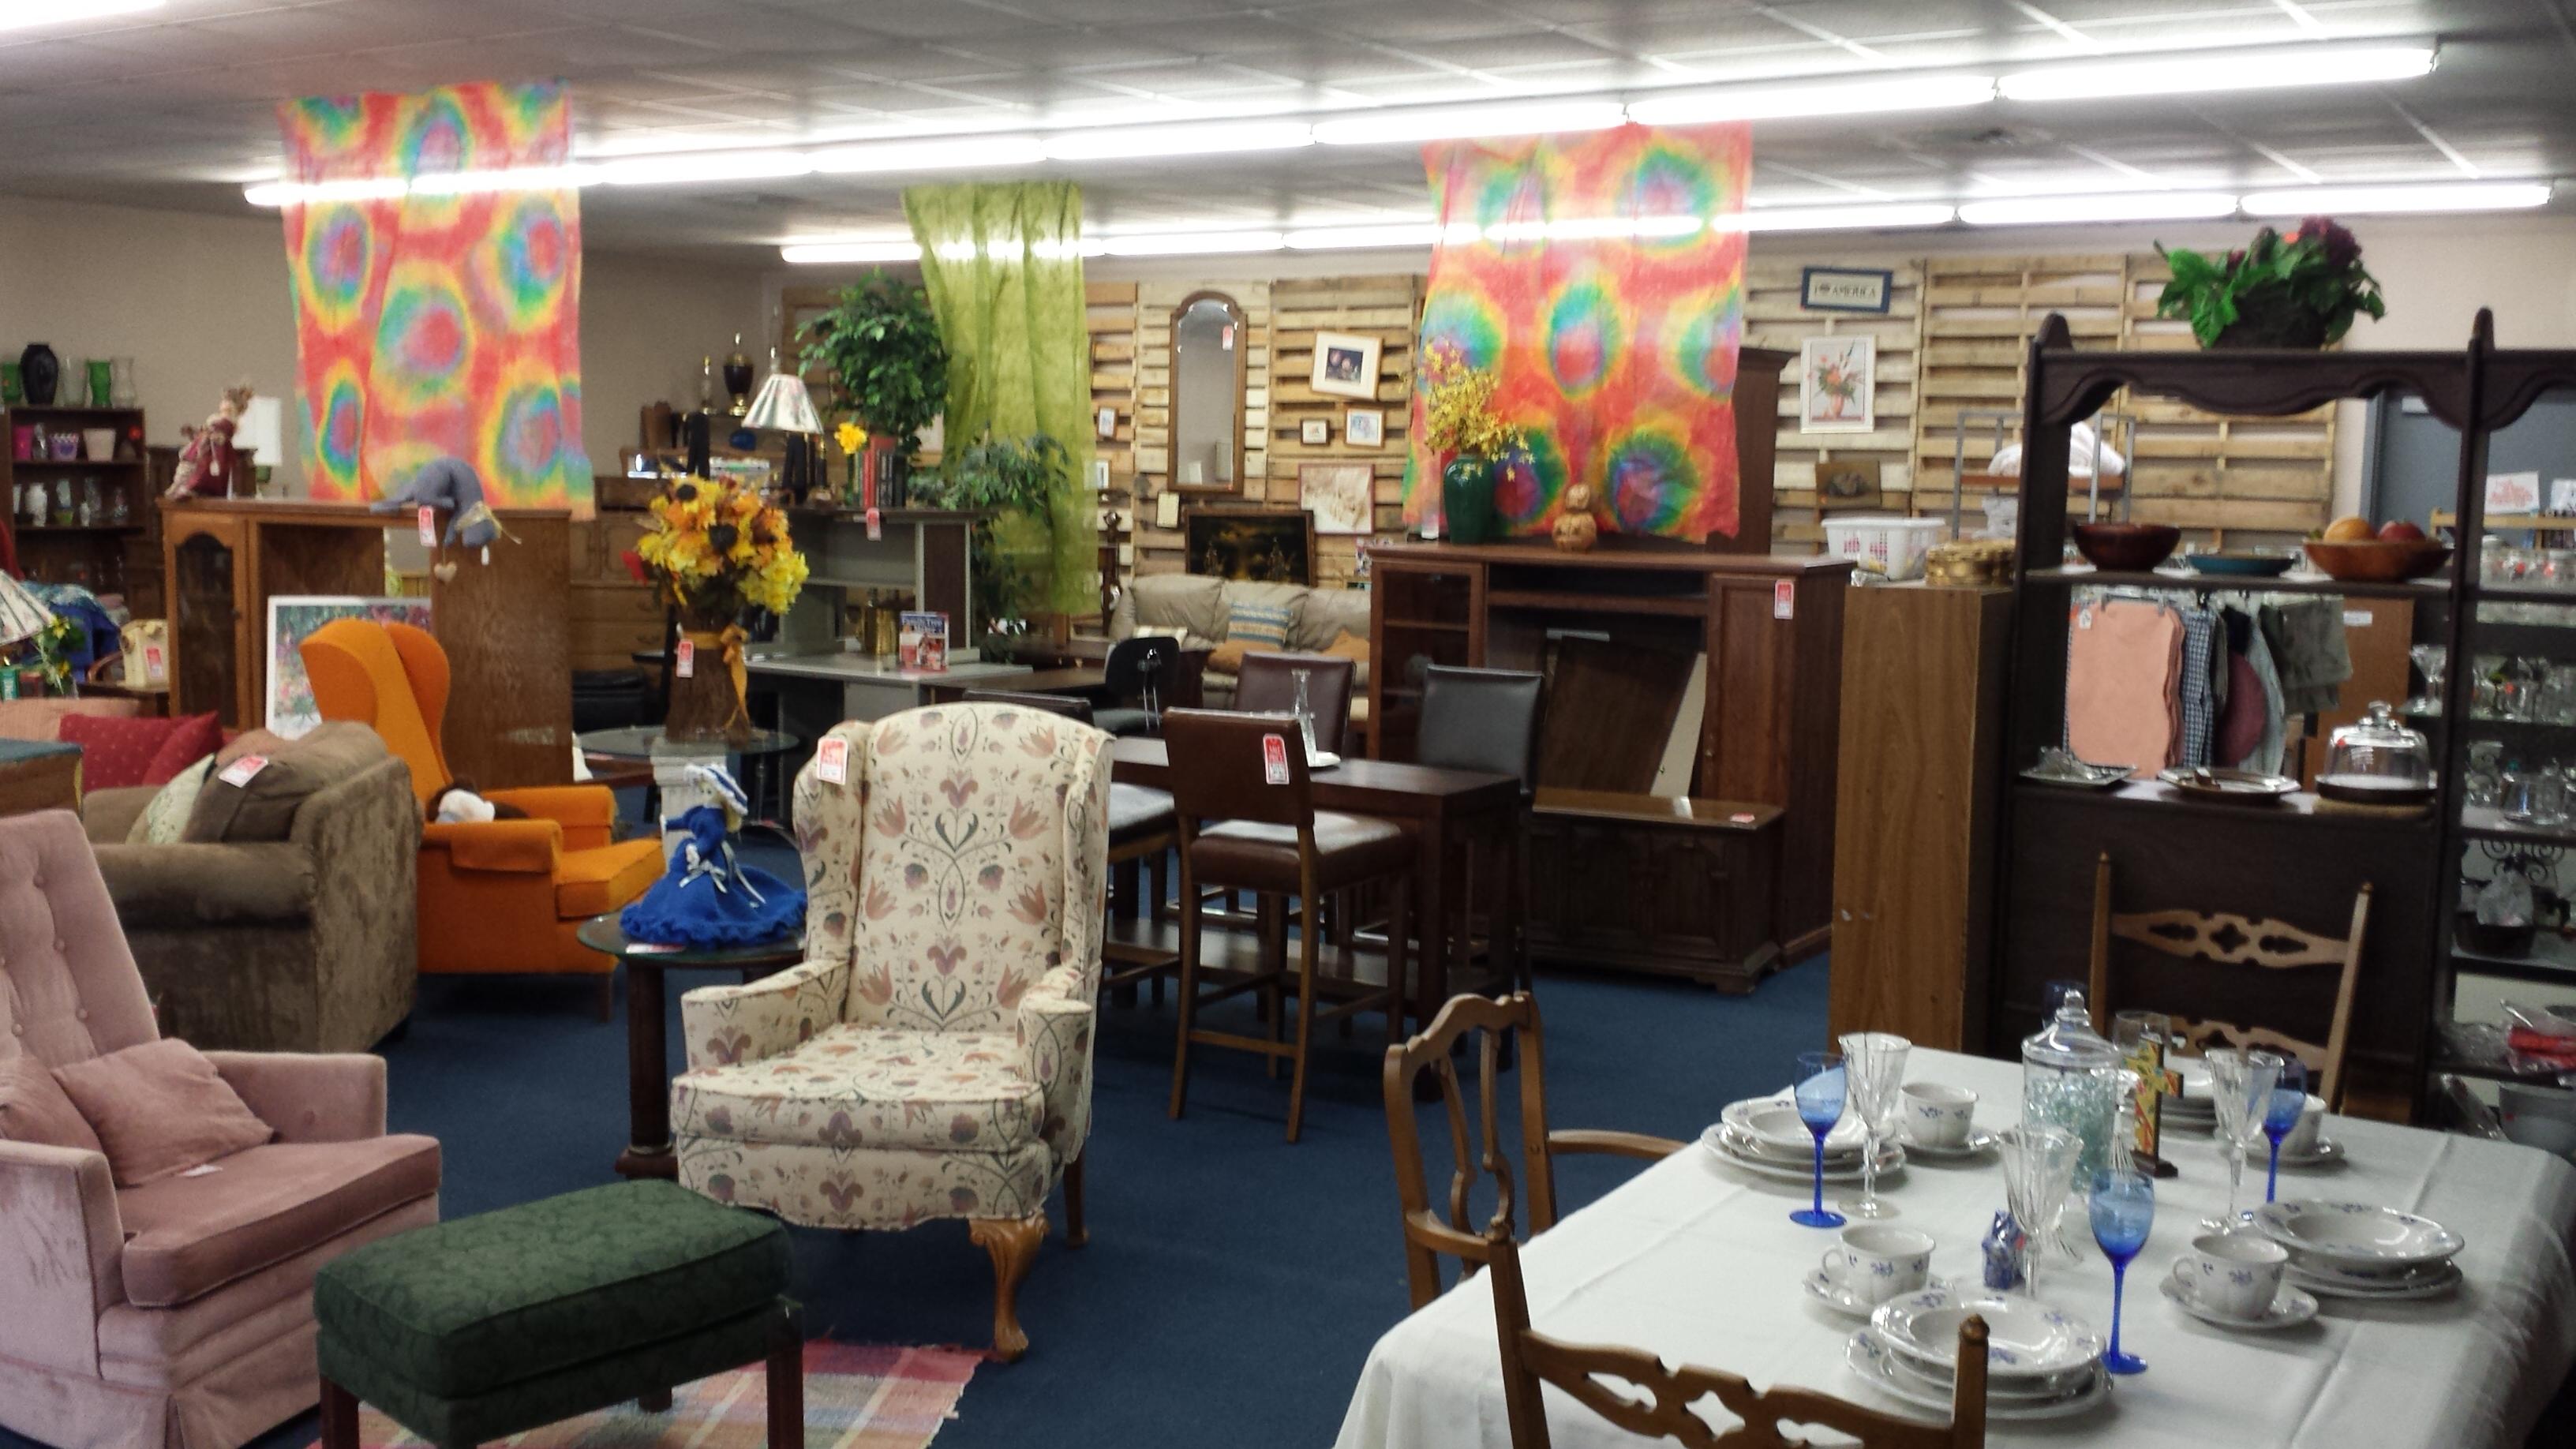 “Thrift” Stores – Getting the Most for Your Money